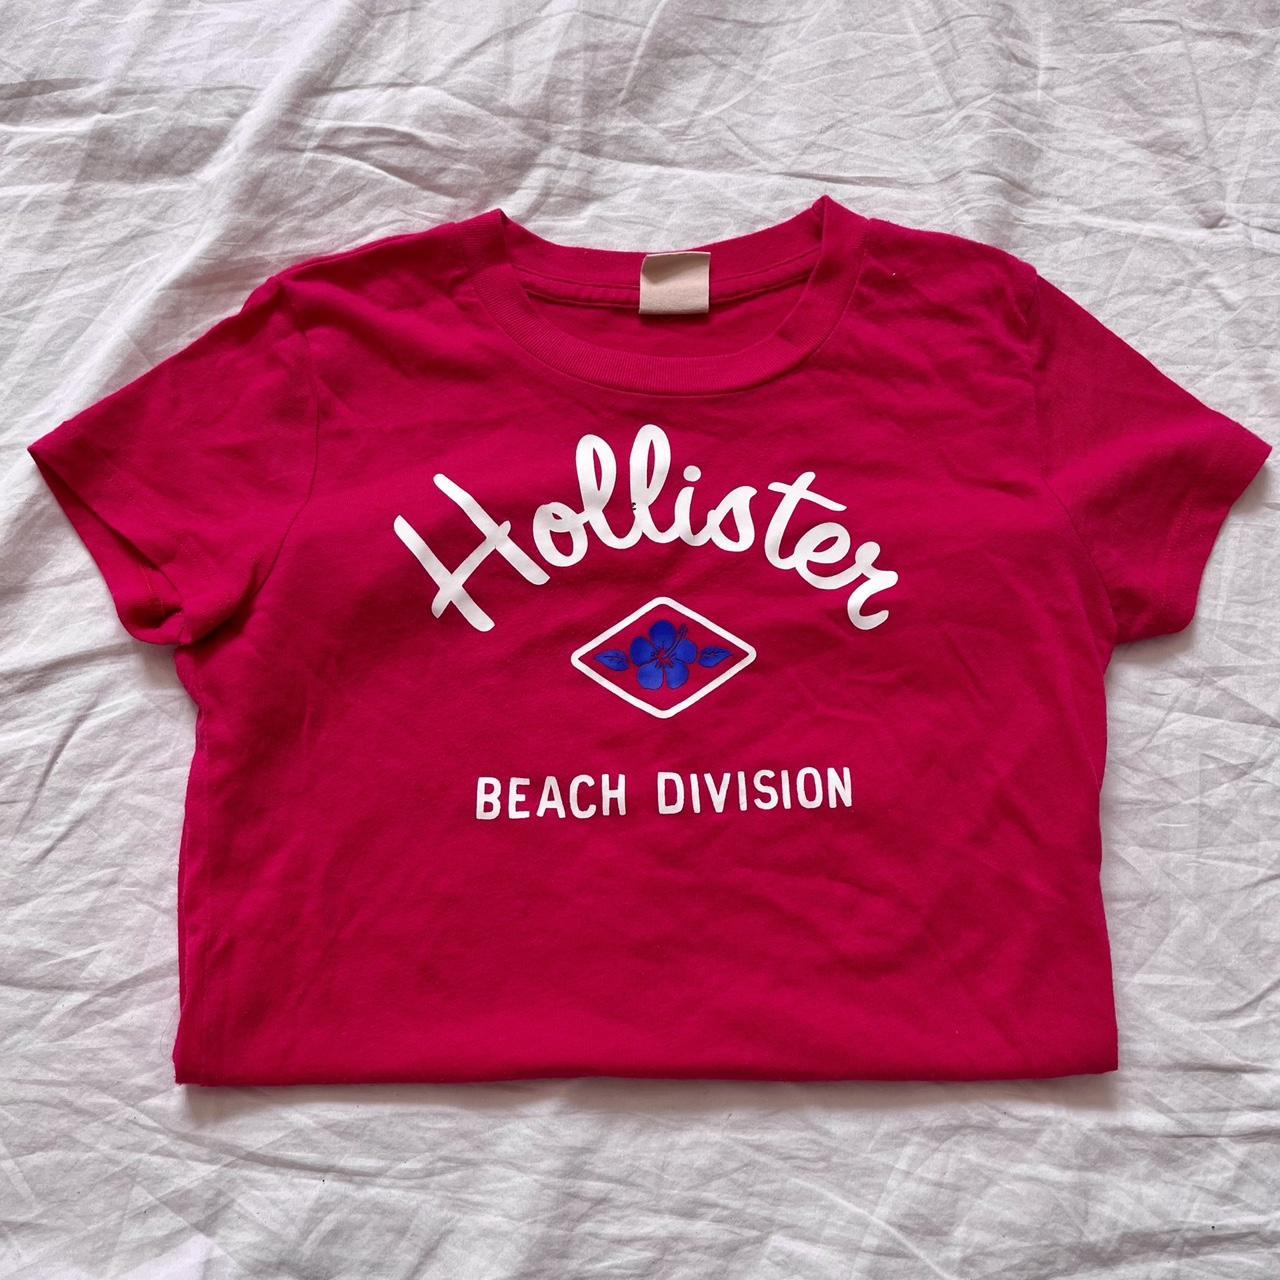 Hollister, Shirts, Hollister Spellout Graphic Tee